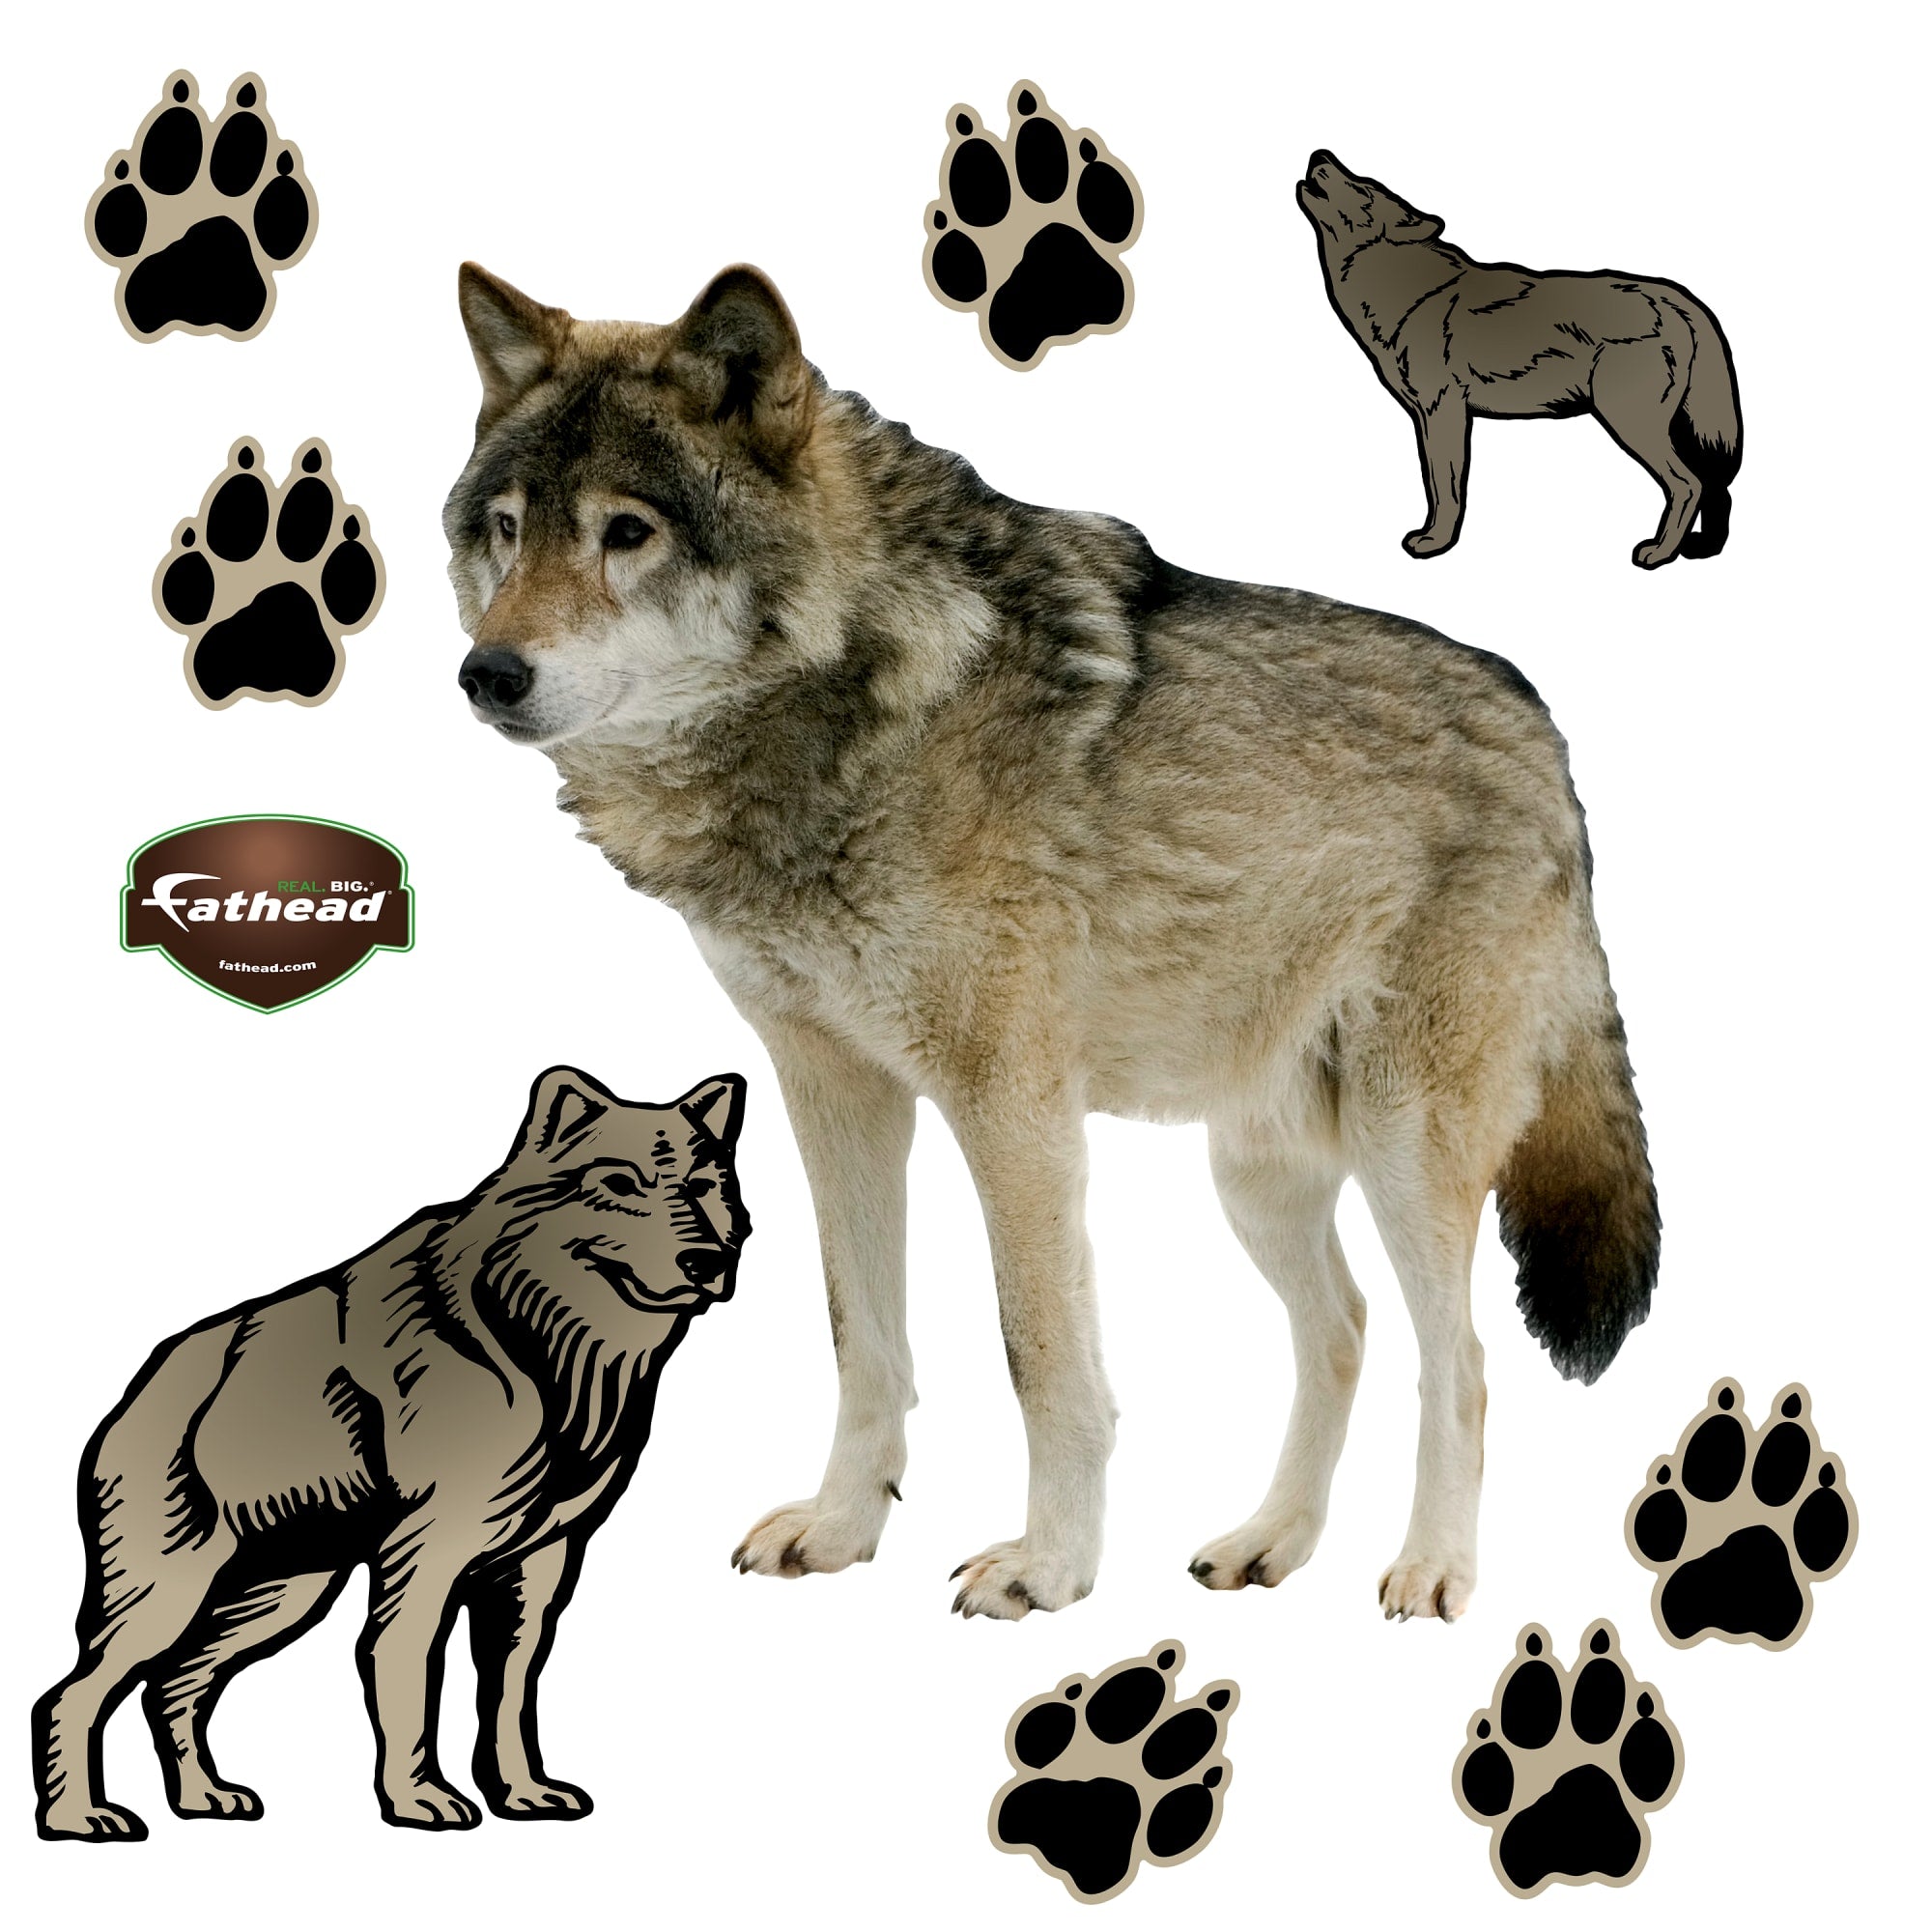 Wolf - Removable Vinyl Decal Giant Animal + 8 Decals (40"W x 38"H) by Fathead